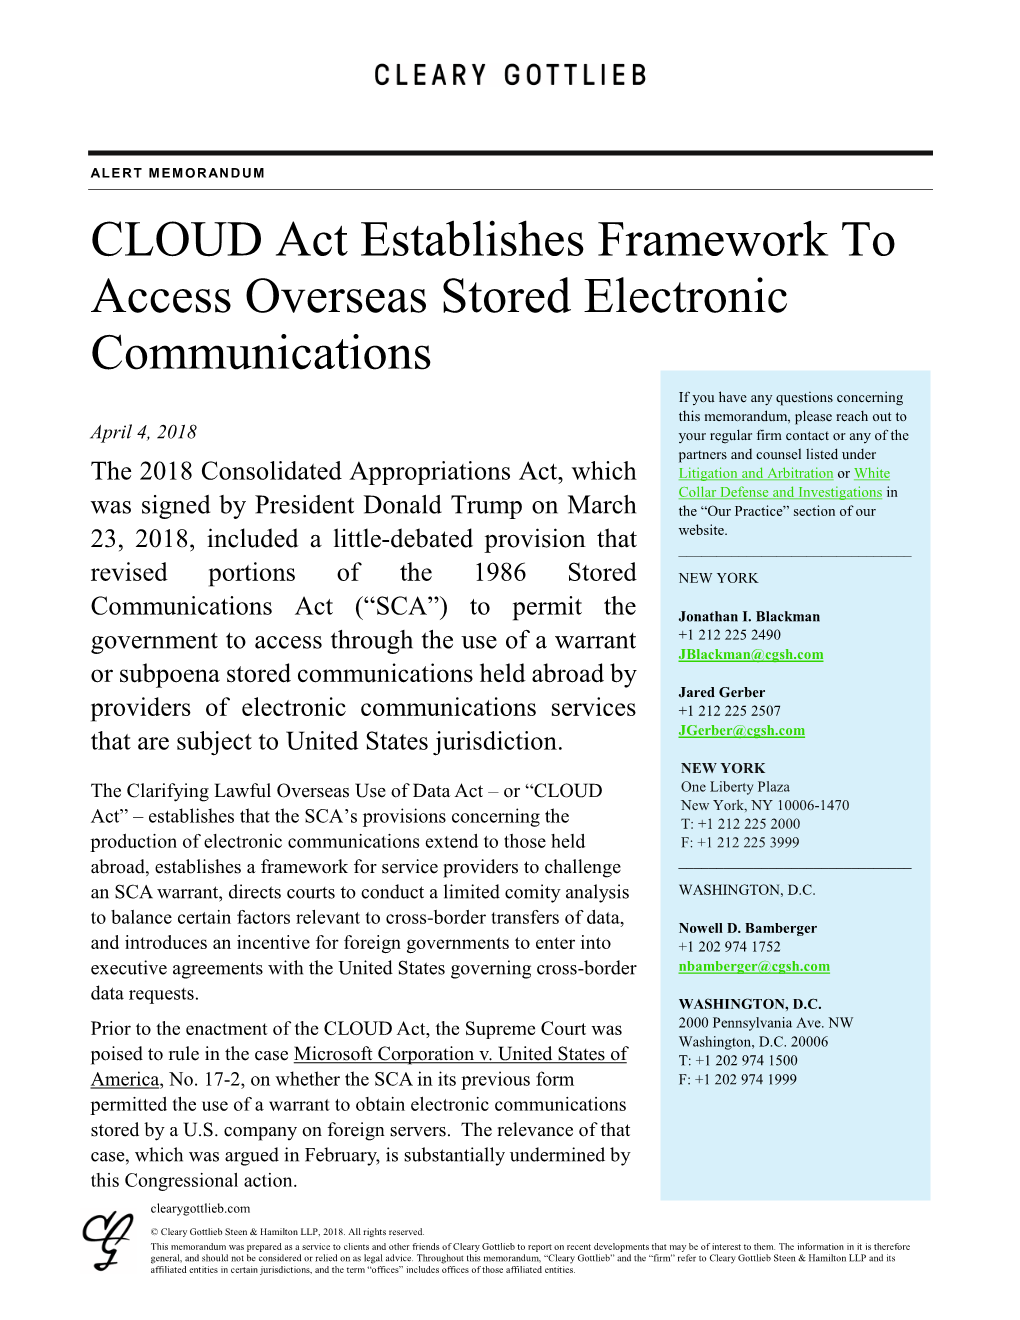 CLOUD Act Establishes Framework to Access Overseas Stored Electronic Communications